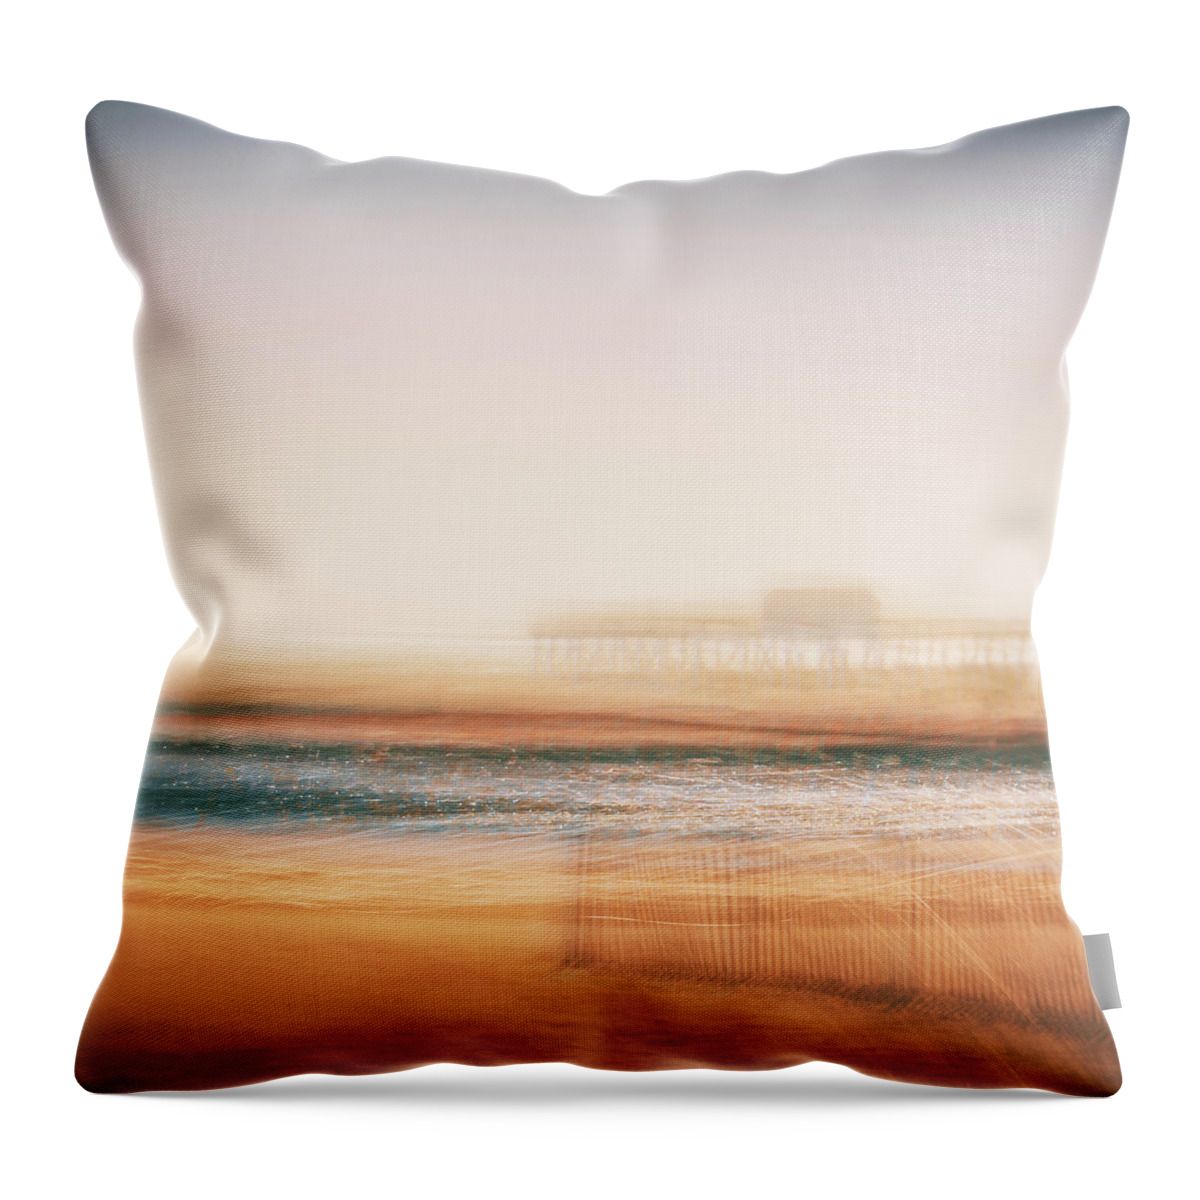  Throw Pillow featuring the photograph Pier by Steve Stanger